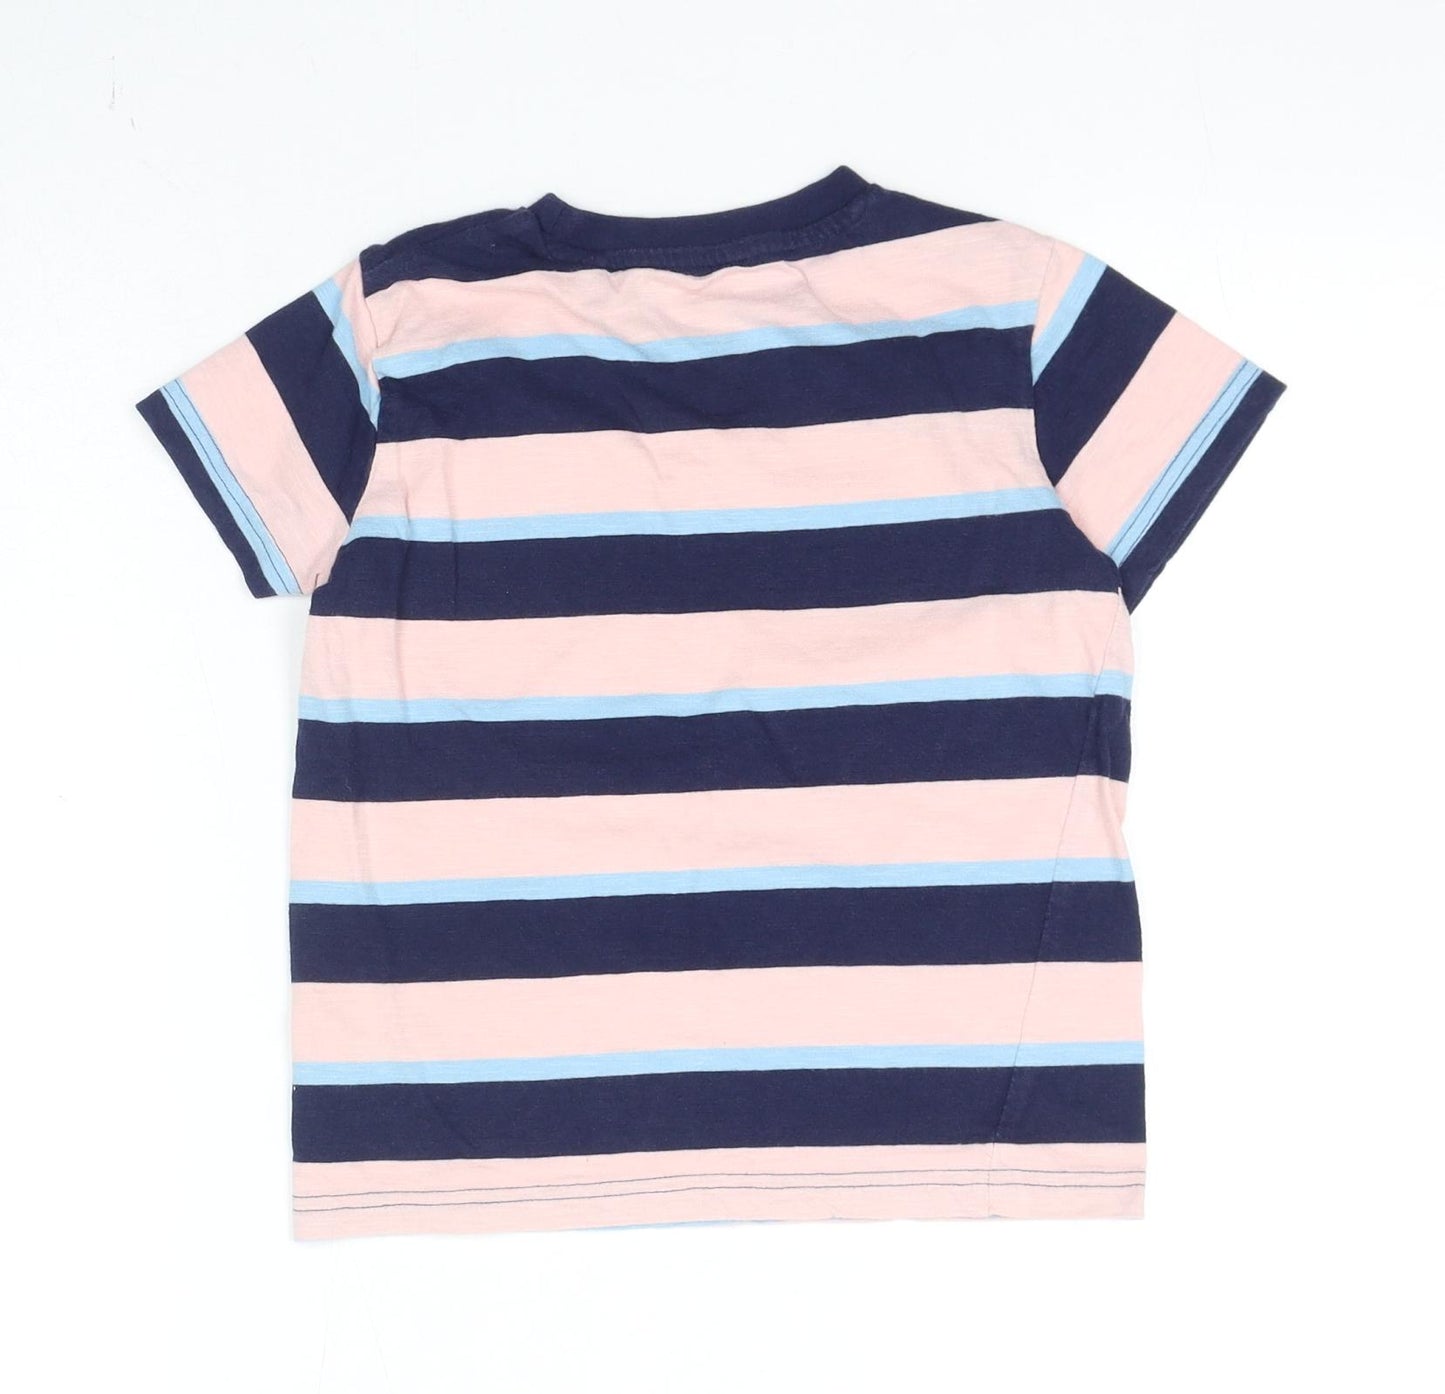 NEXT Boys Blue Striped Cotton Basic T-Shirt Size 5-6 Years Round Neck Pullover - Sail Boat